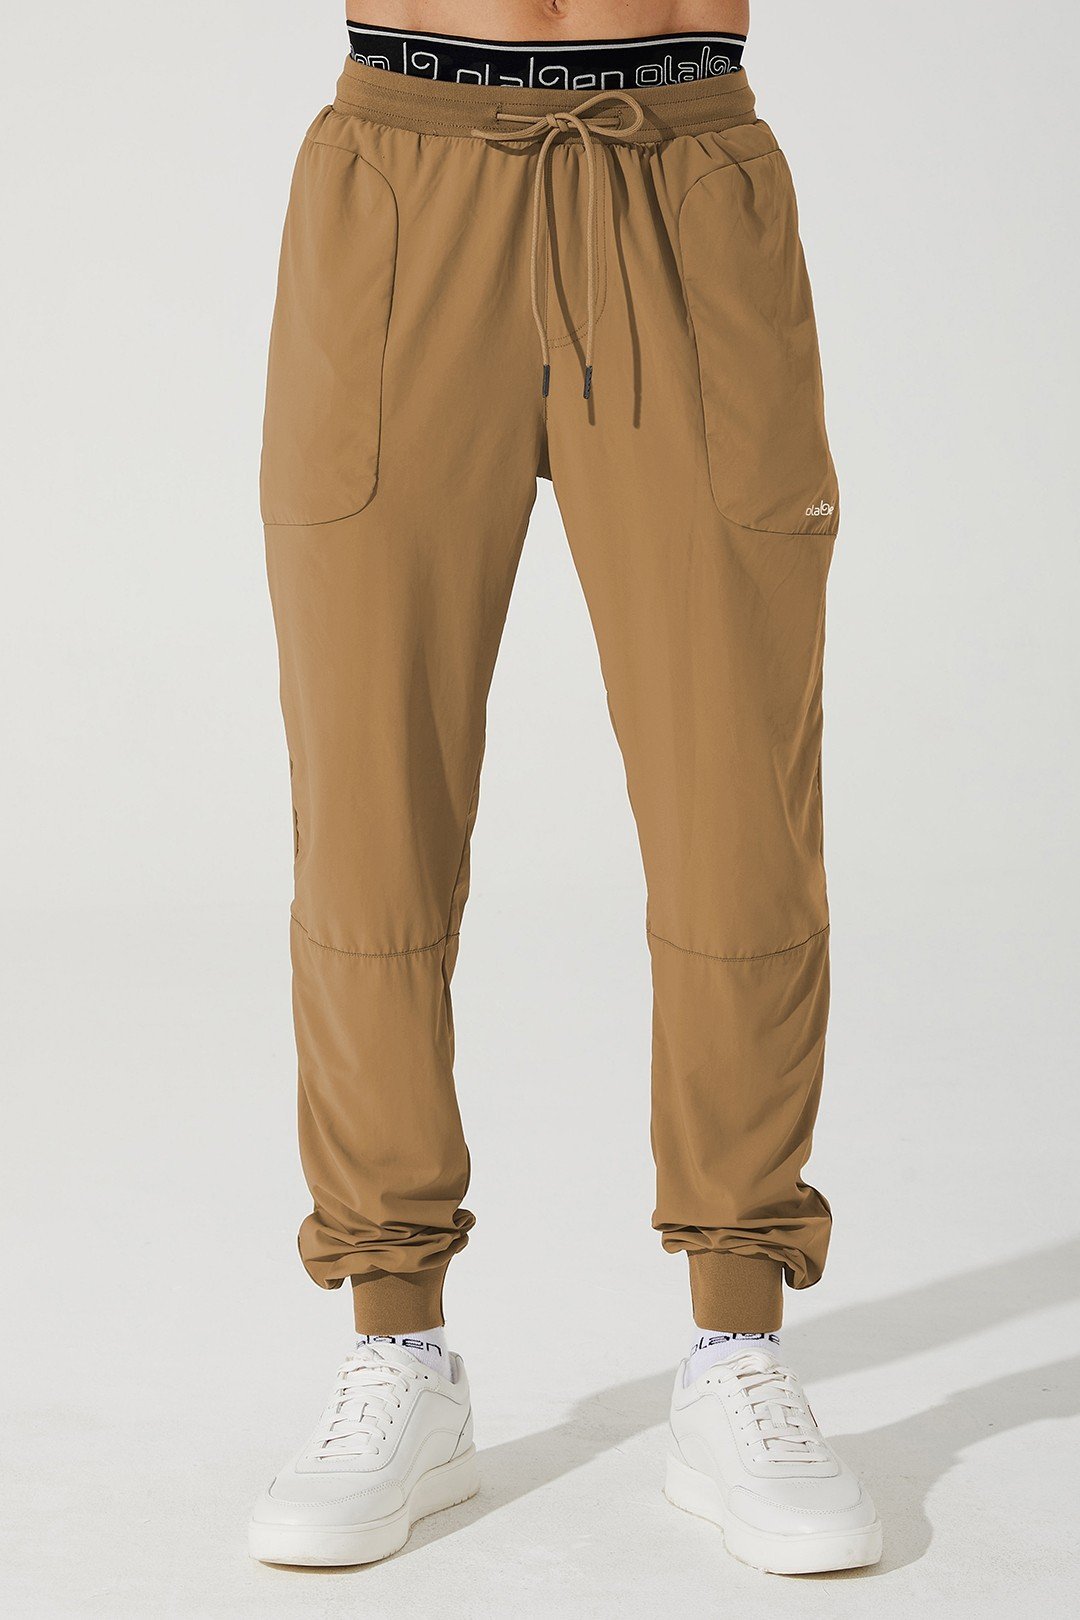 Men's cappuccino beige trousers with a stylish design - OW-0029-MTR-BG_1.jpg